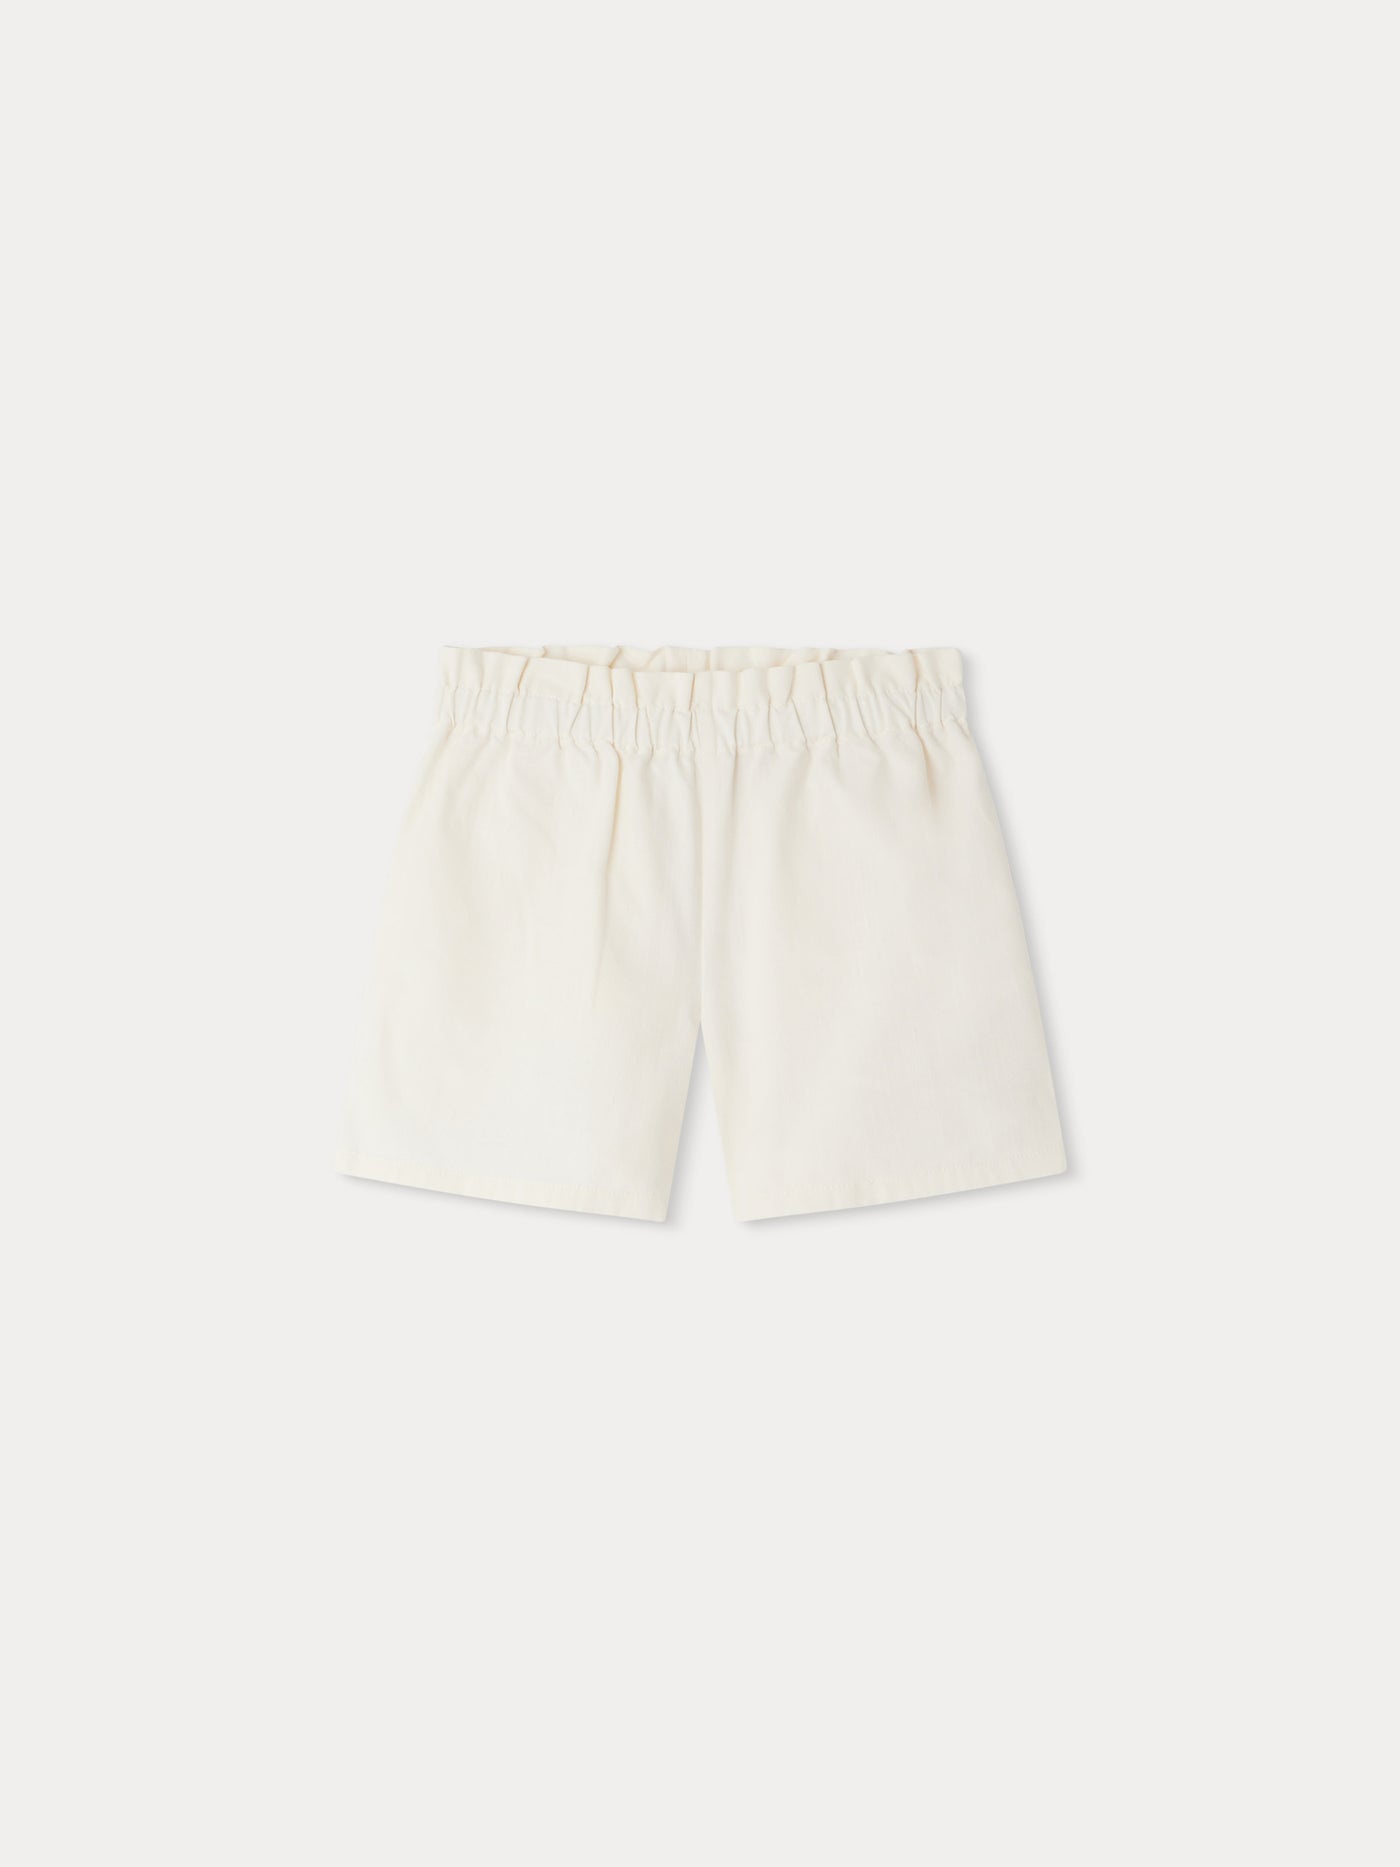 Nice Laundry's $1,400 Cashmere Boxers